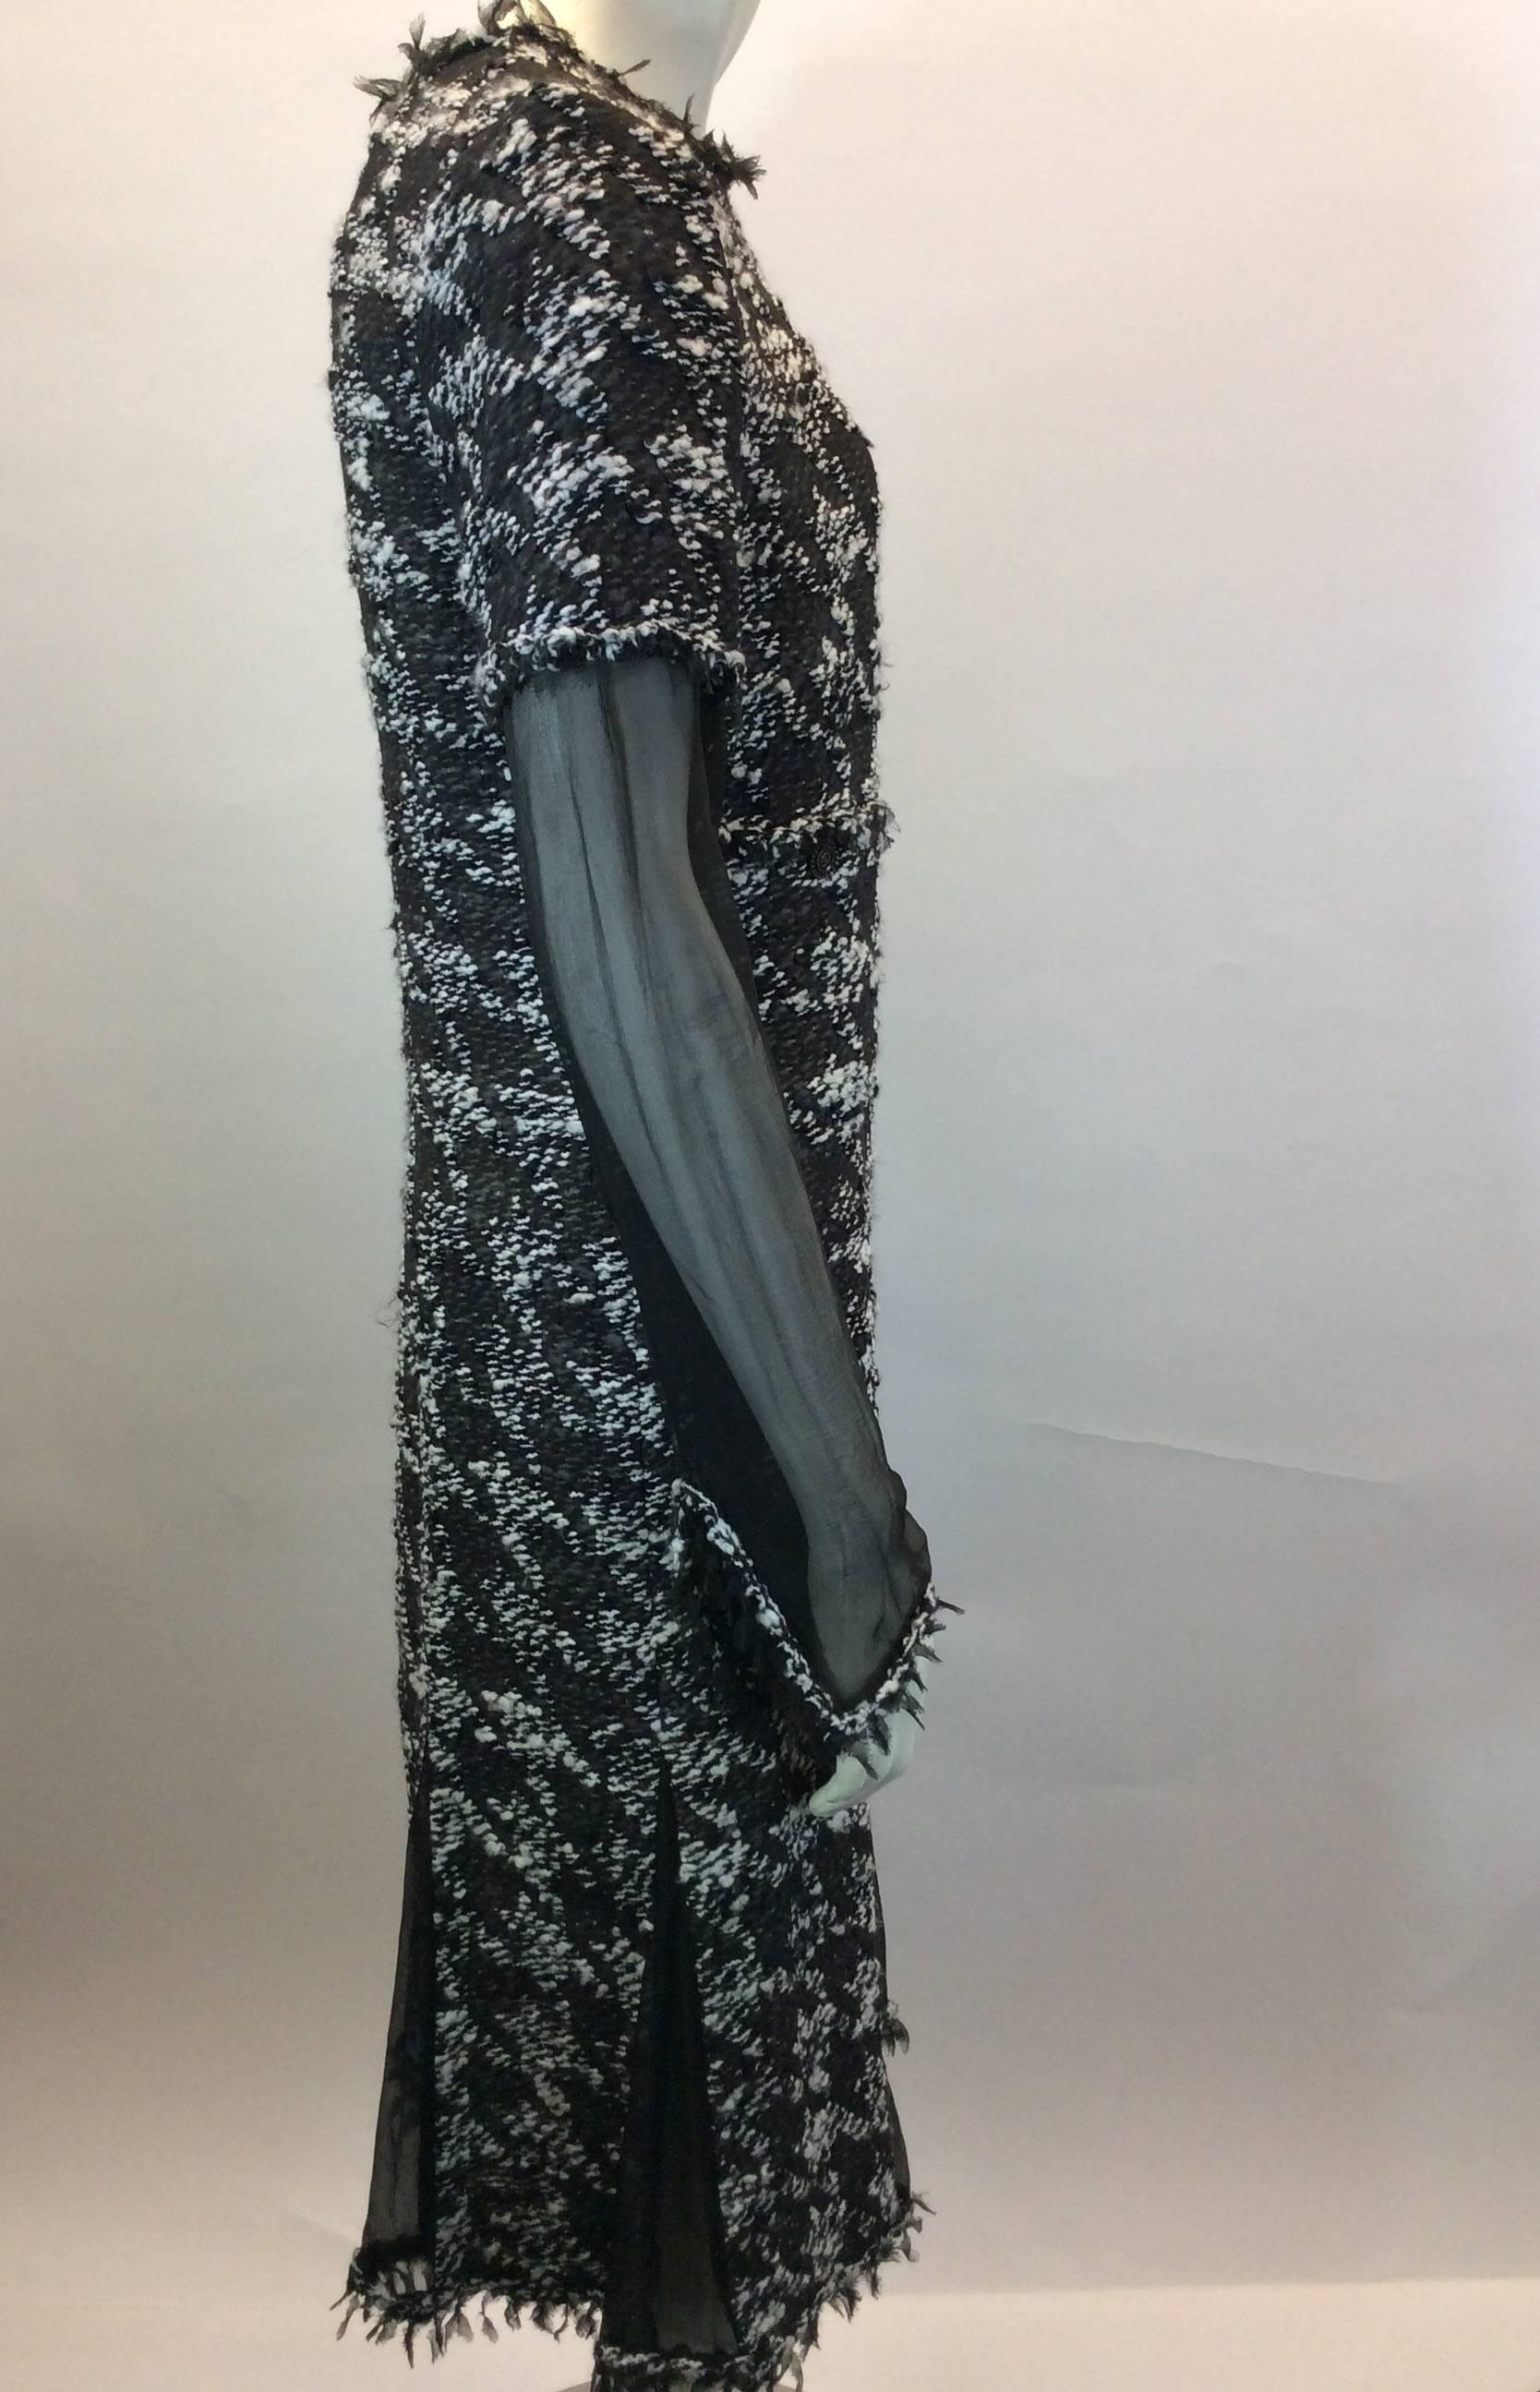 Chanel Black and White Houndstooth Tweed Dress with Sheer Sleeves In Excellent Condition For Sale In Narberth, PA